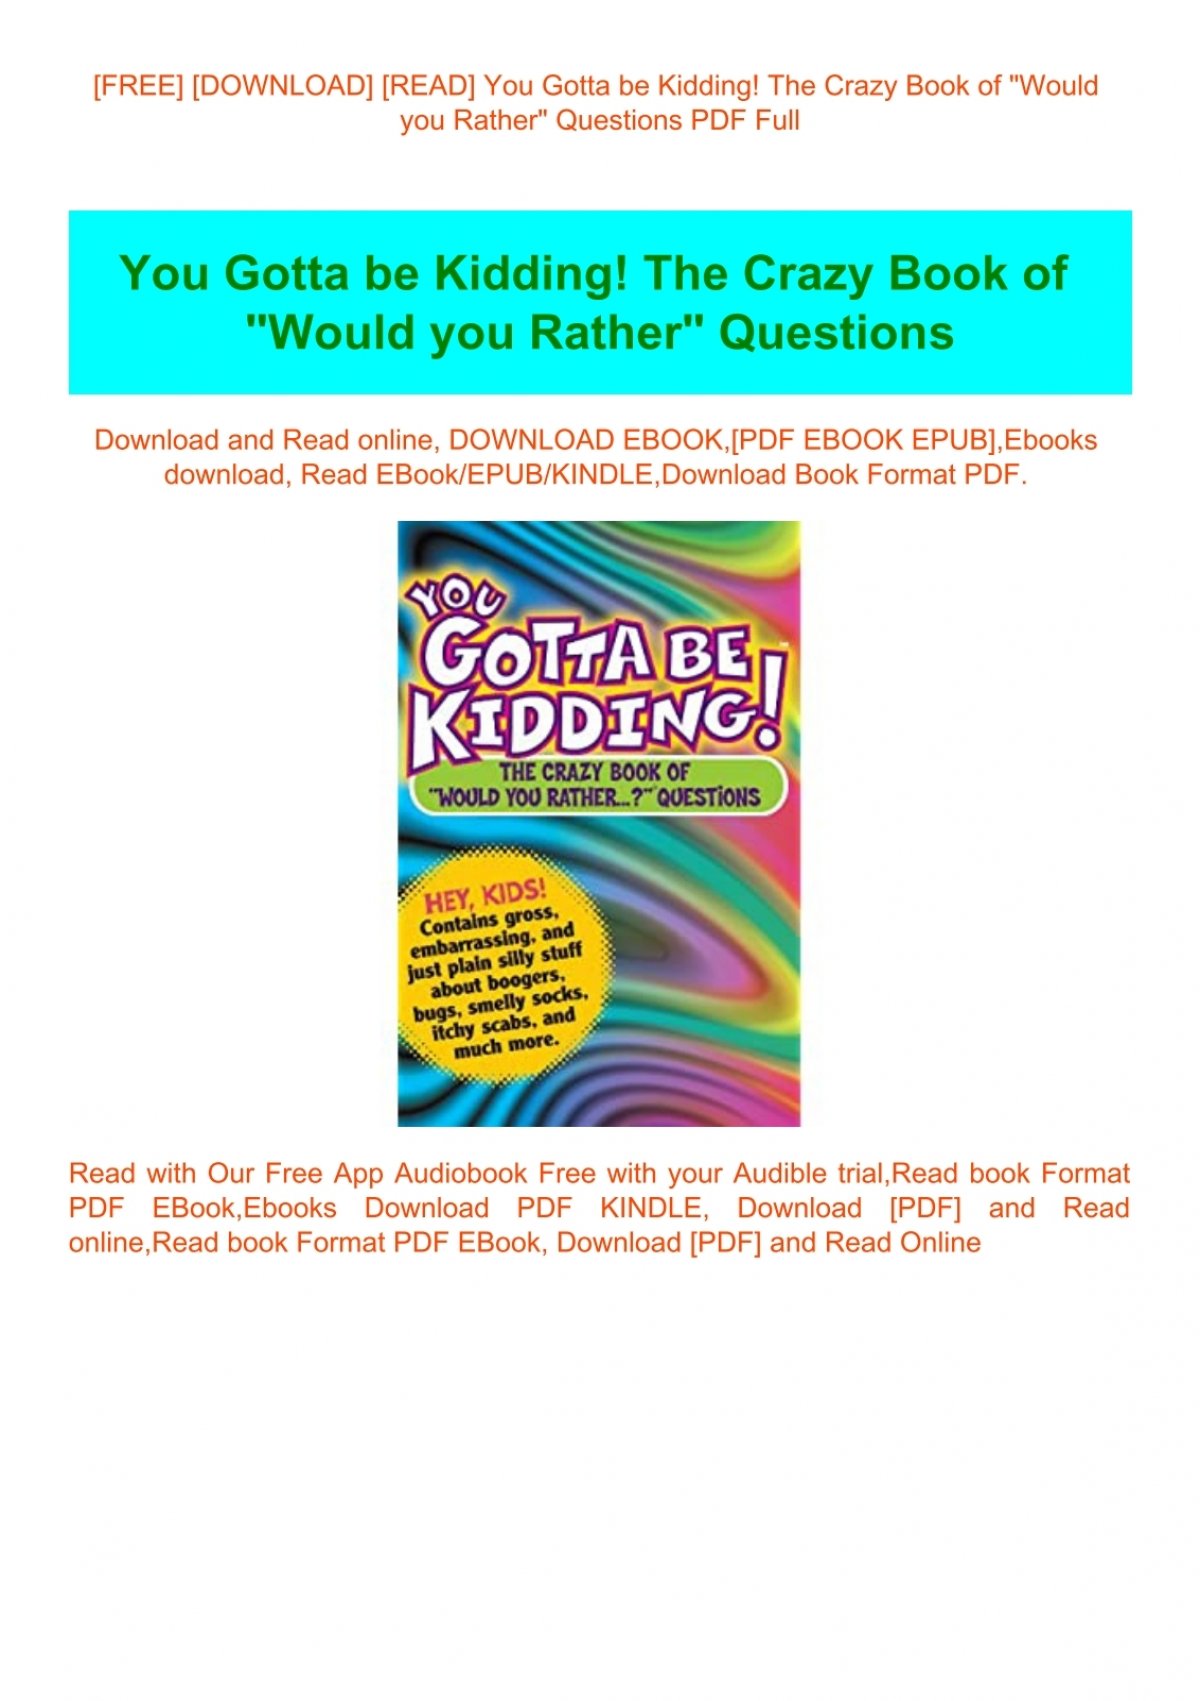 free-download-read-you-gotta-be-kidding-the-crazy-book-of-would